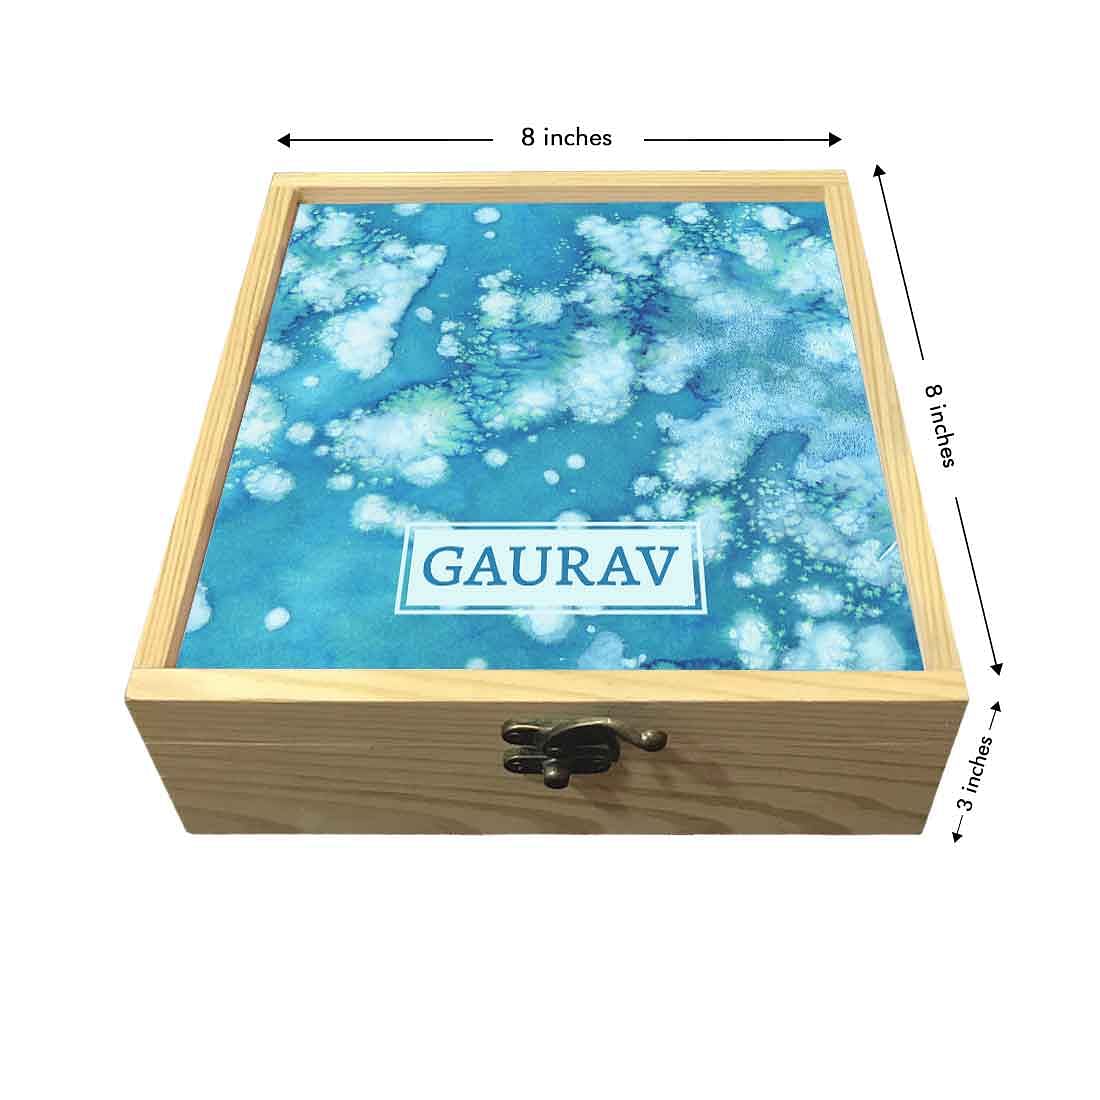 New Jewellery Box with Compartments - Arctic Space Light Blue Watercolor Nutcase